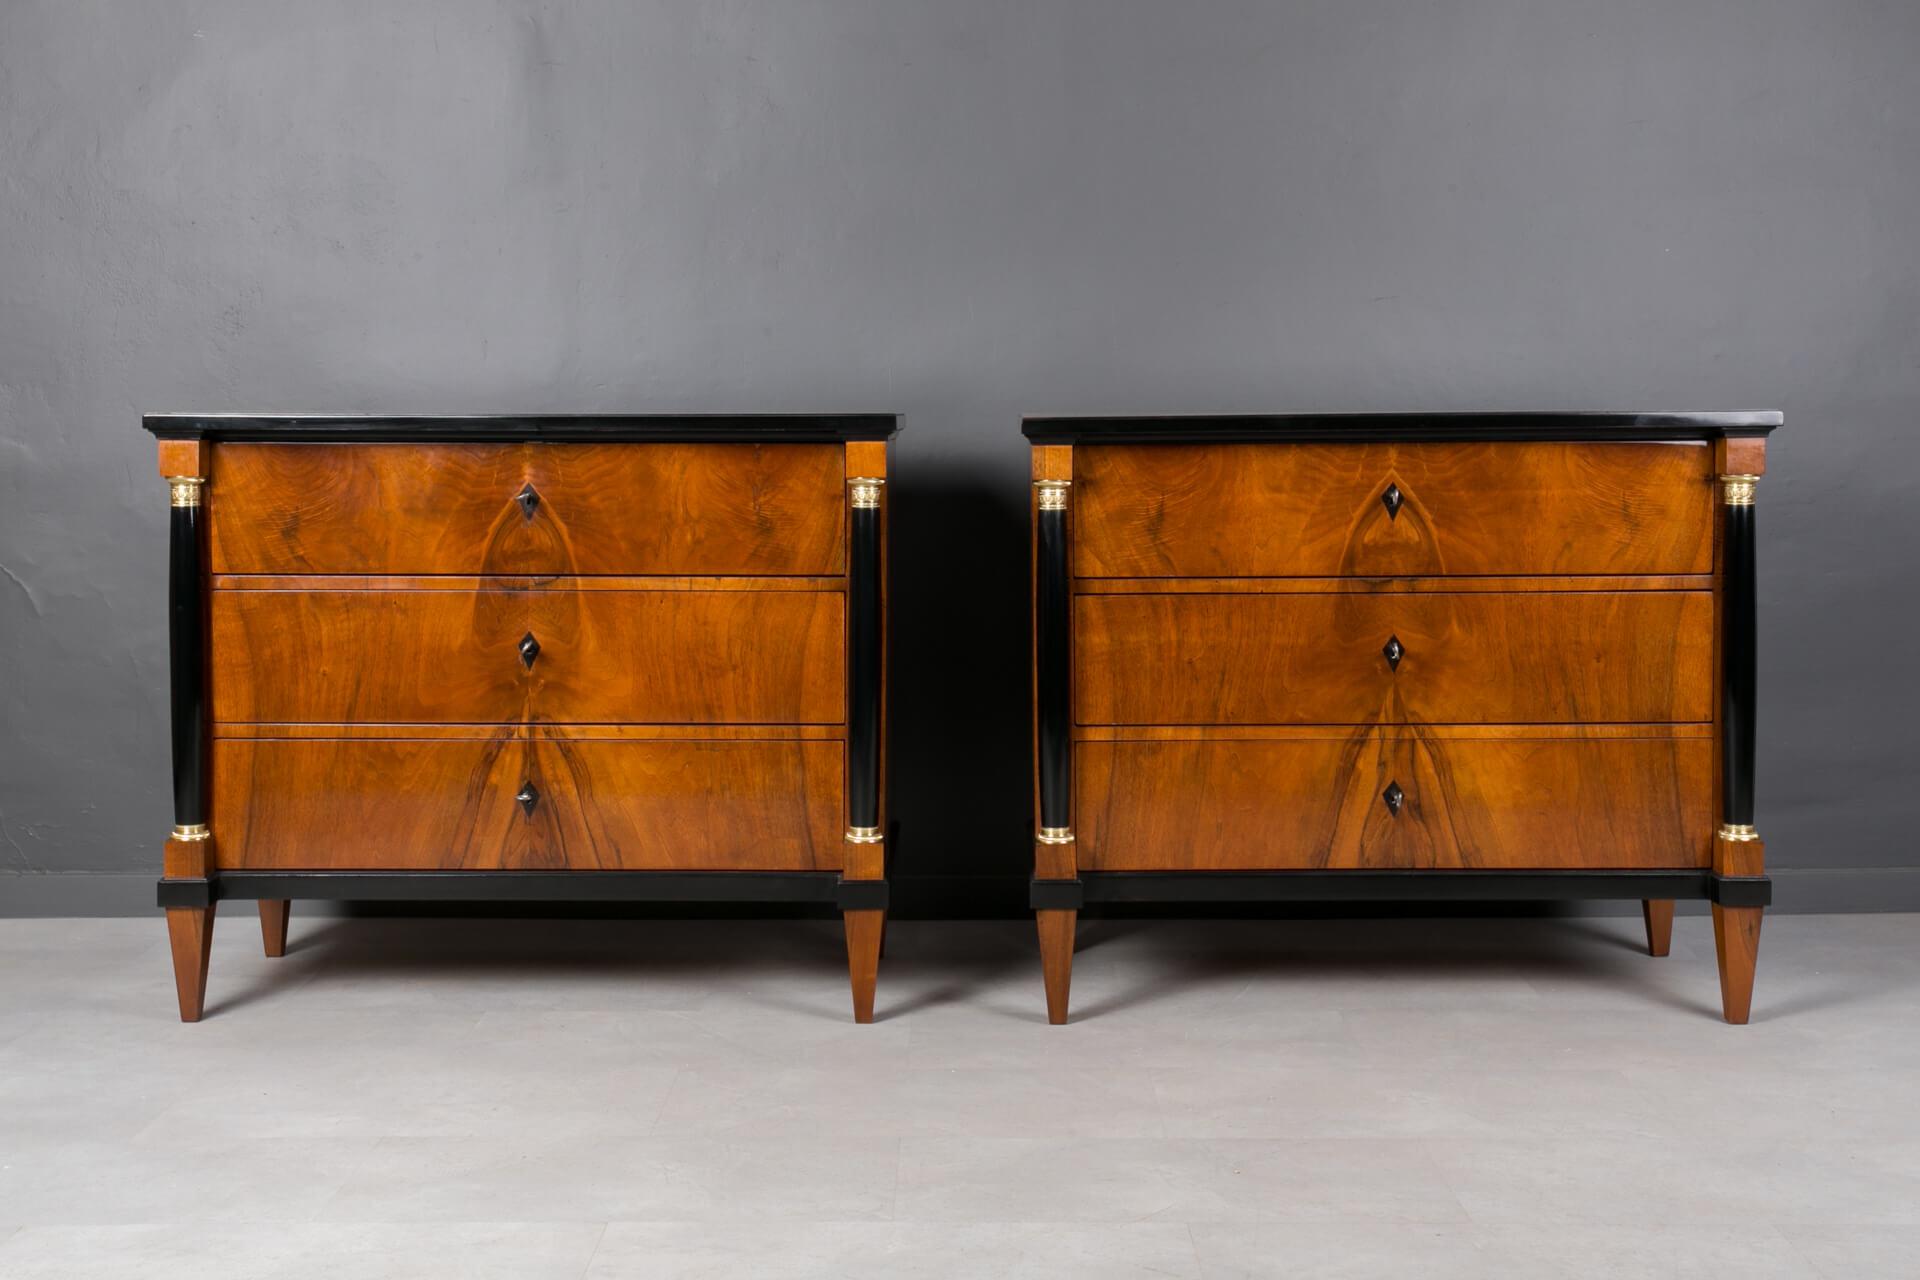 These 2 Biedermeier chests of drawers come from first half of 19th century, approximately 1830 - 1850. They were made in Germany. Veneered with beautiful walnut veneer. They have undergone a careful renovation process in our workshop and are in